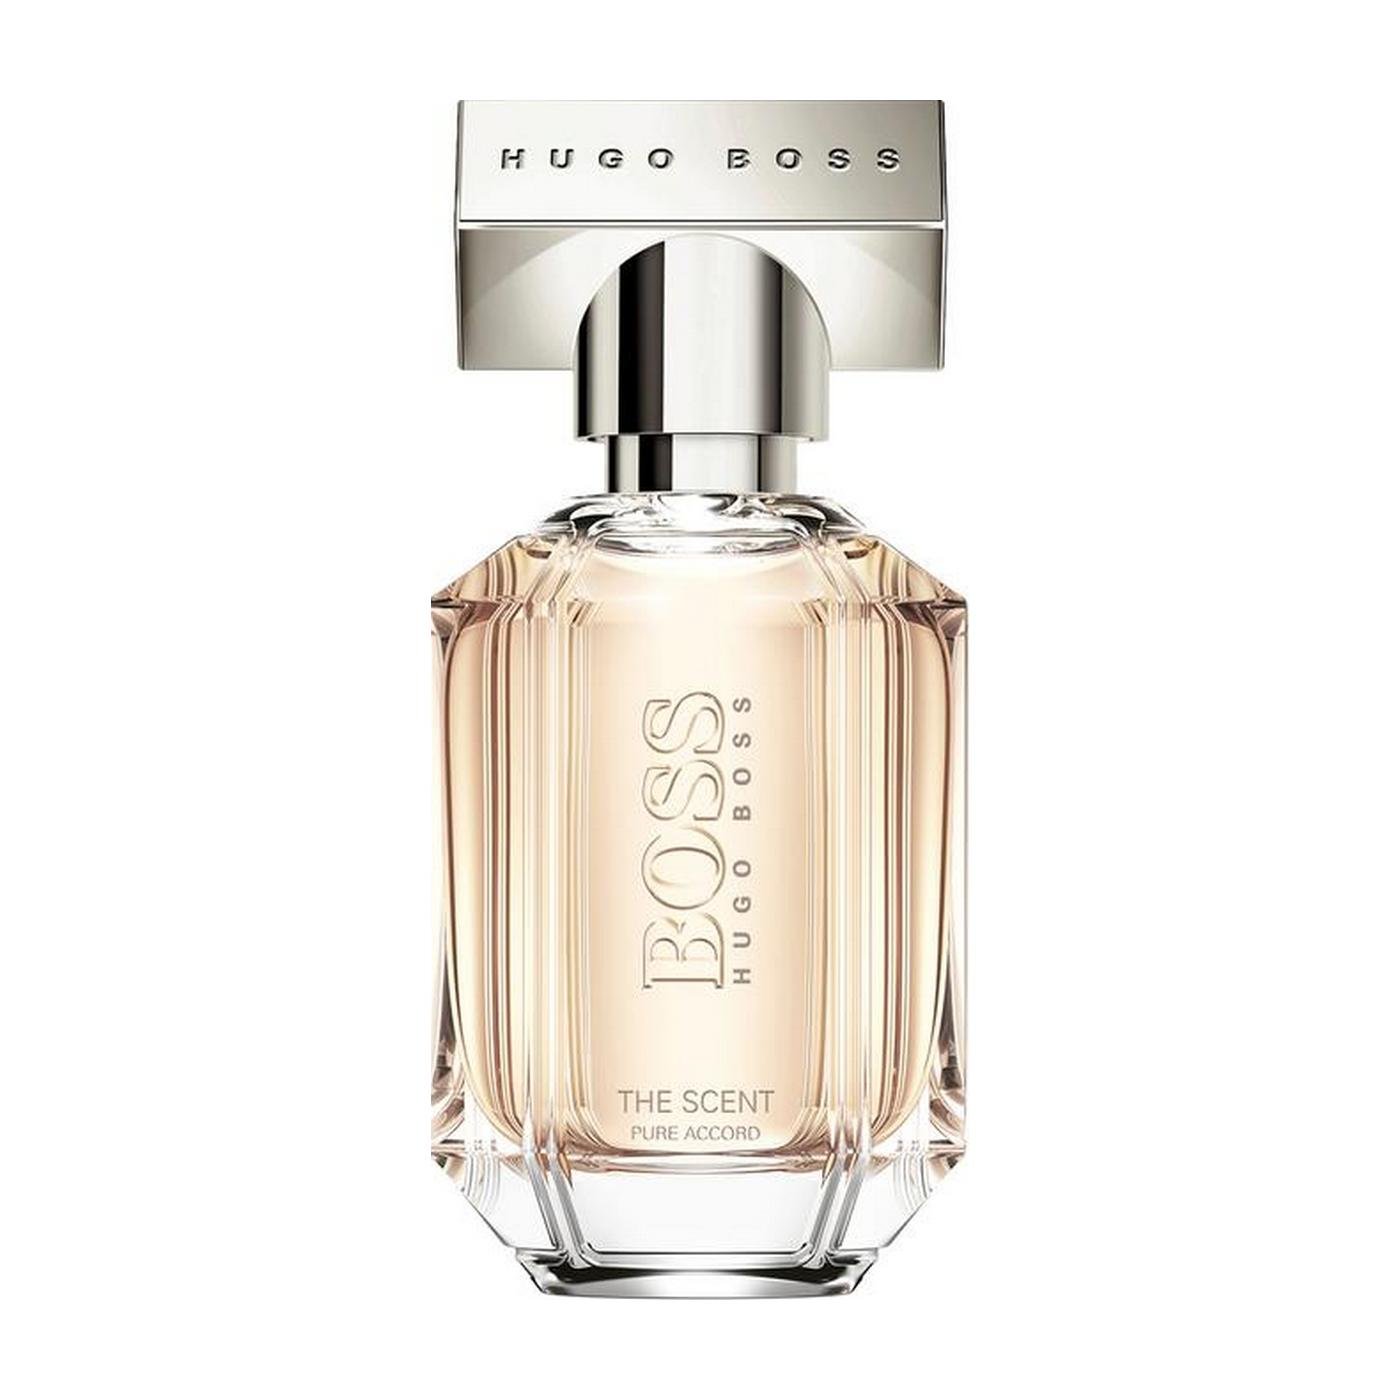 Туалетная вода Hugo Boss The Scent Pure Accord for her 30 мл remtekey cwtwb1u545 remote key hon66 2 button 434mhz with id46 chip for honda accord civic fit 2003 2007